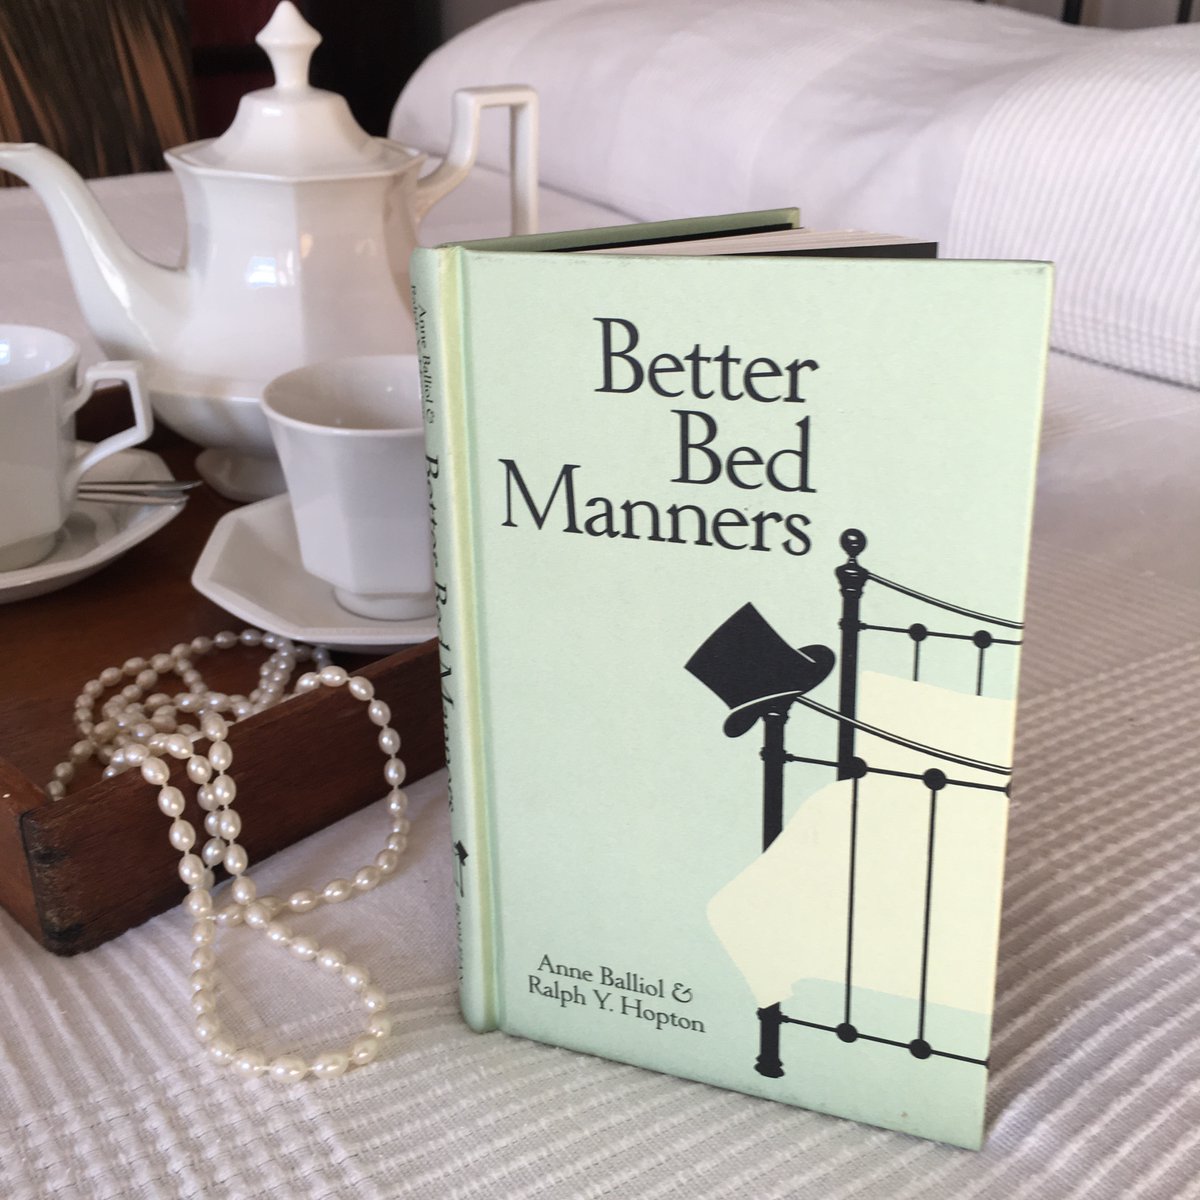 It's publication day for Better Bed Manners! Ever needed tips on how to sleep next to a snoring spouse? How to convalesce in style? Or the etiquette of staying in a haunted house? This little book, first published in the 1930s, is full of the advice you've always needed!